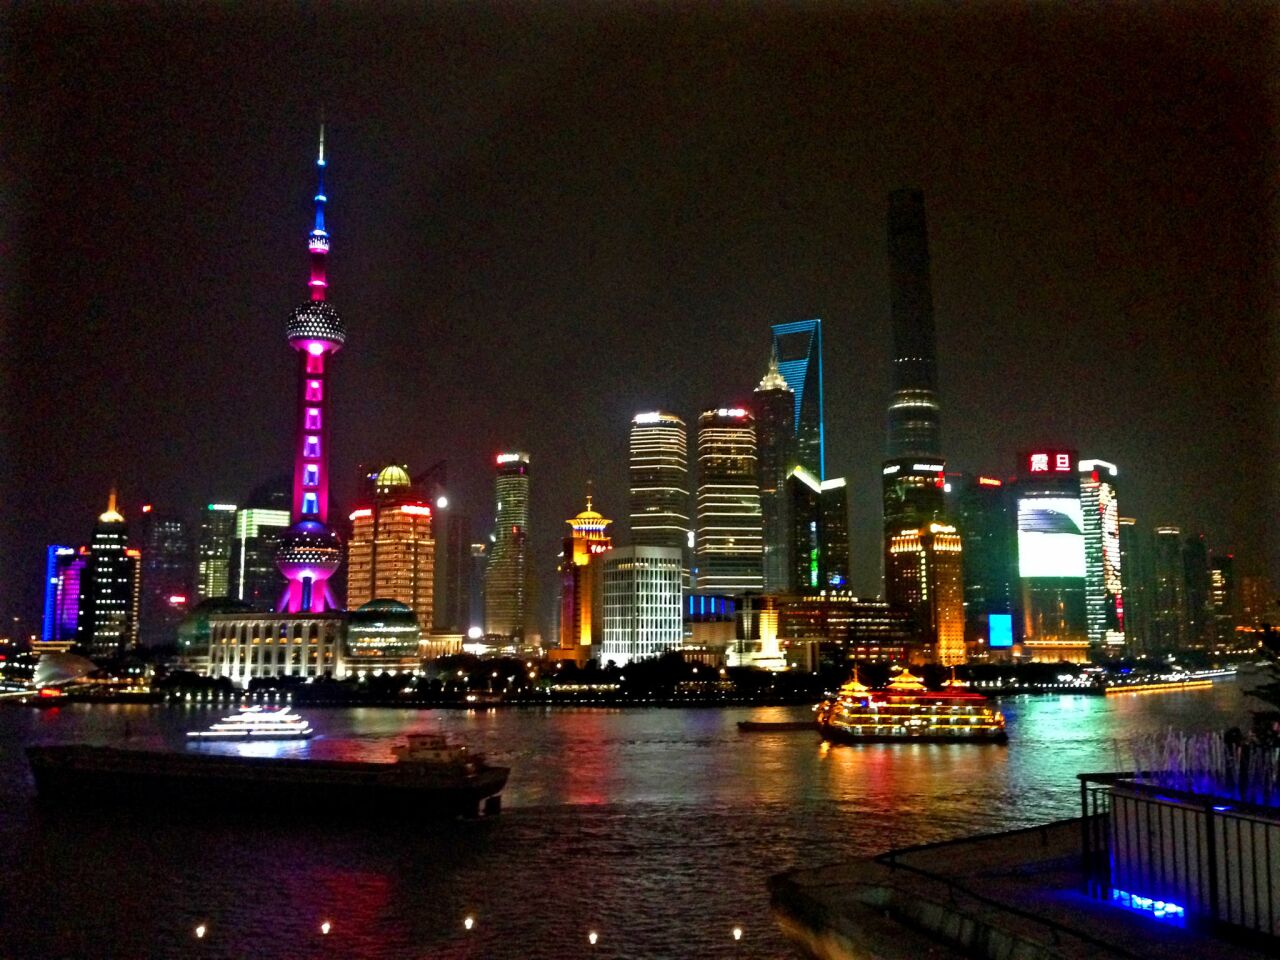 A similar look across the Huangpu River from the Bund -- but this time in the evening -- showcases the dramatic high-rises of Pudong on the city's east bank.